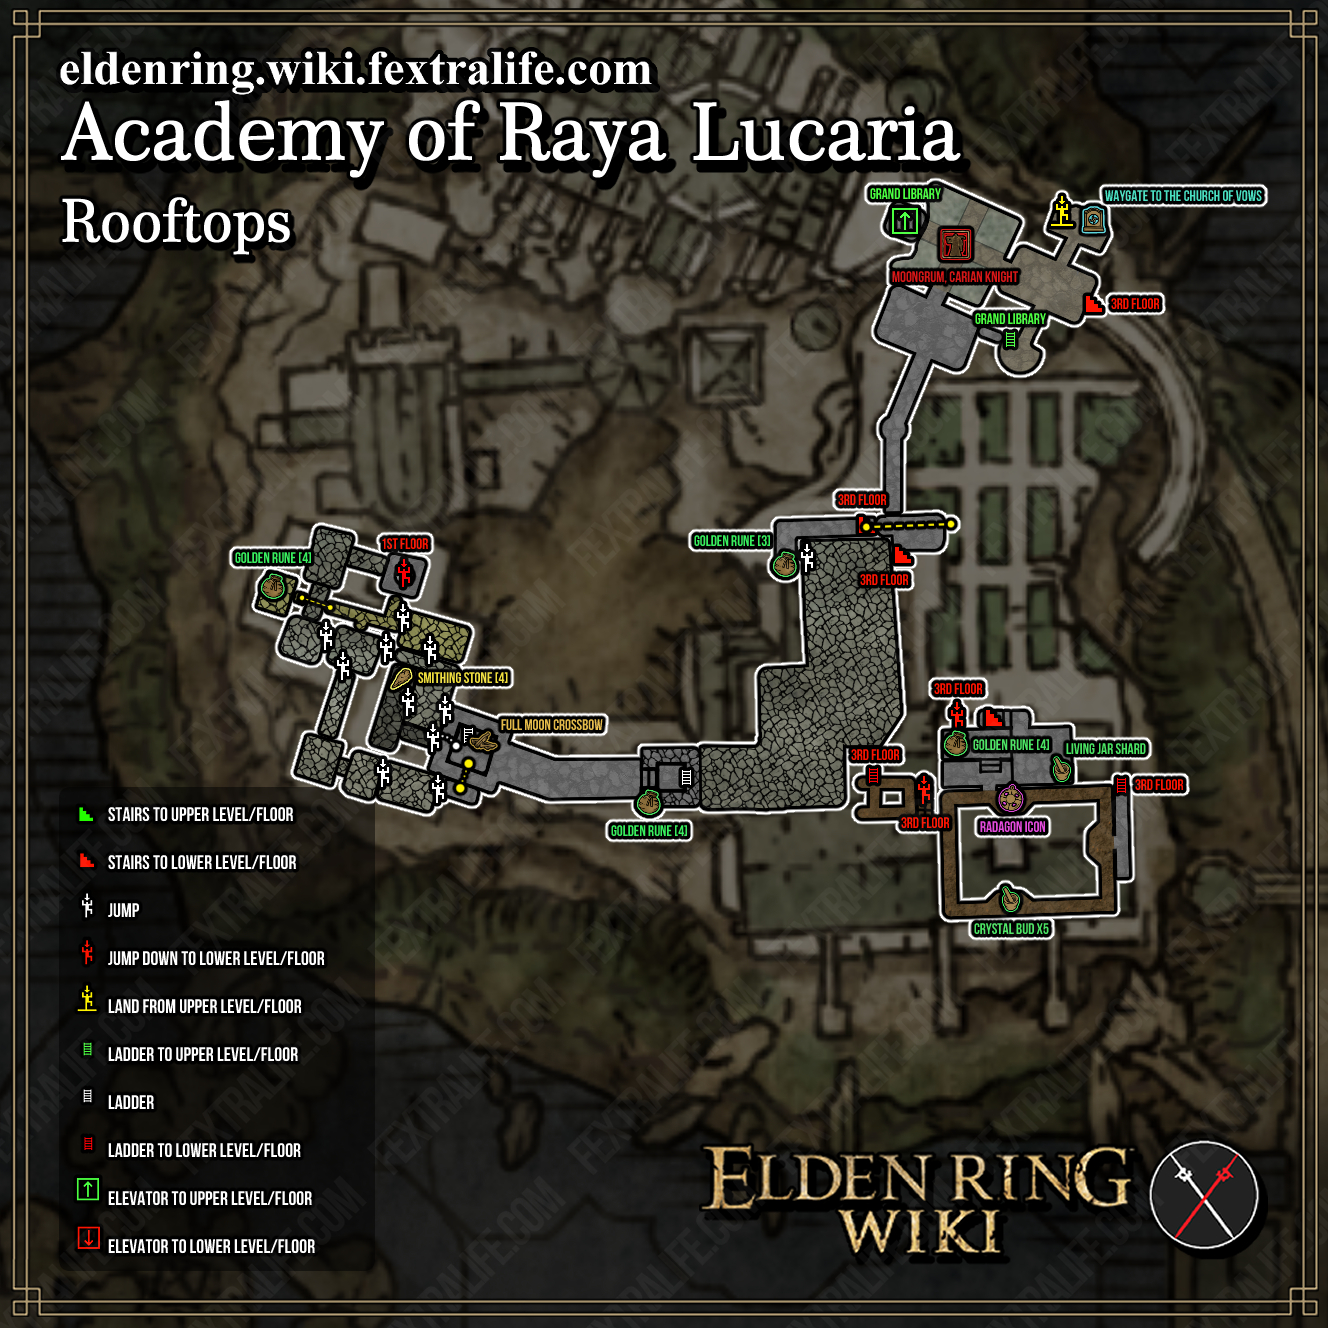 Elden Ring Academy of Raya Lucaria: All Item Locations Guide 